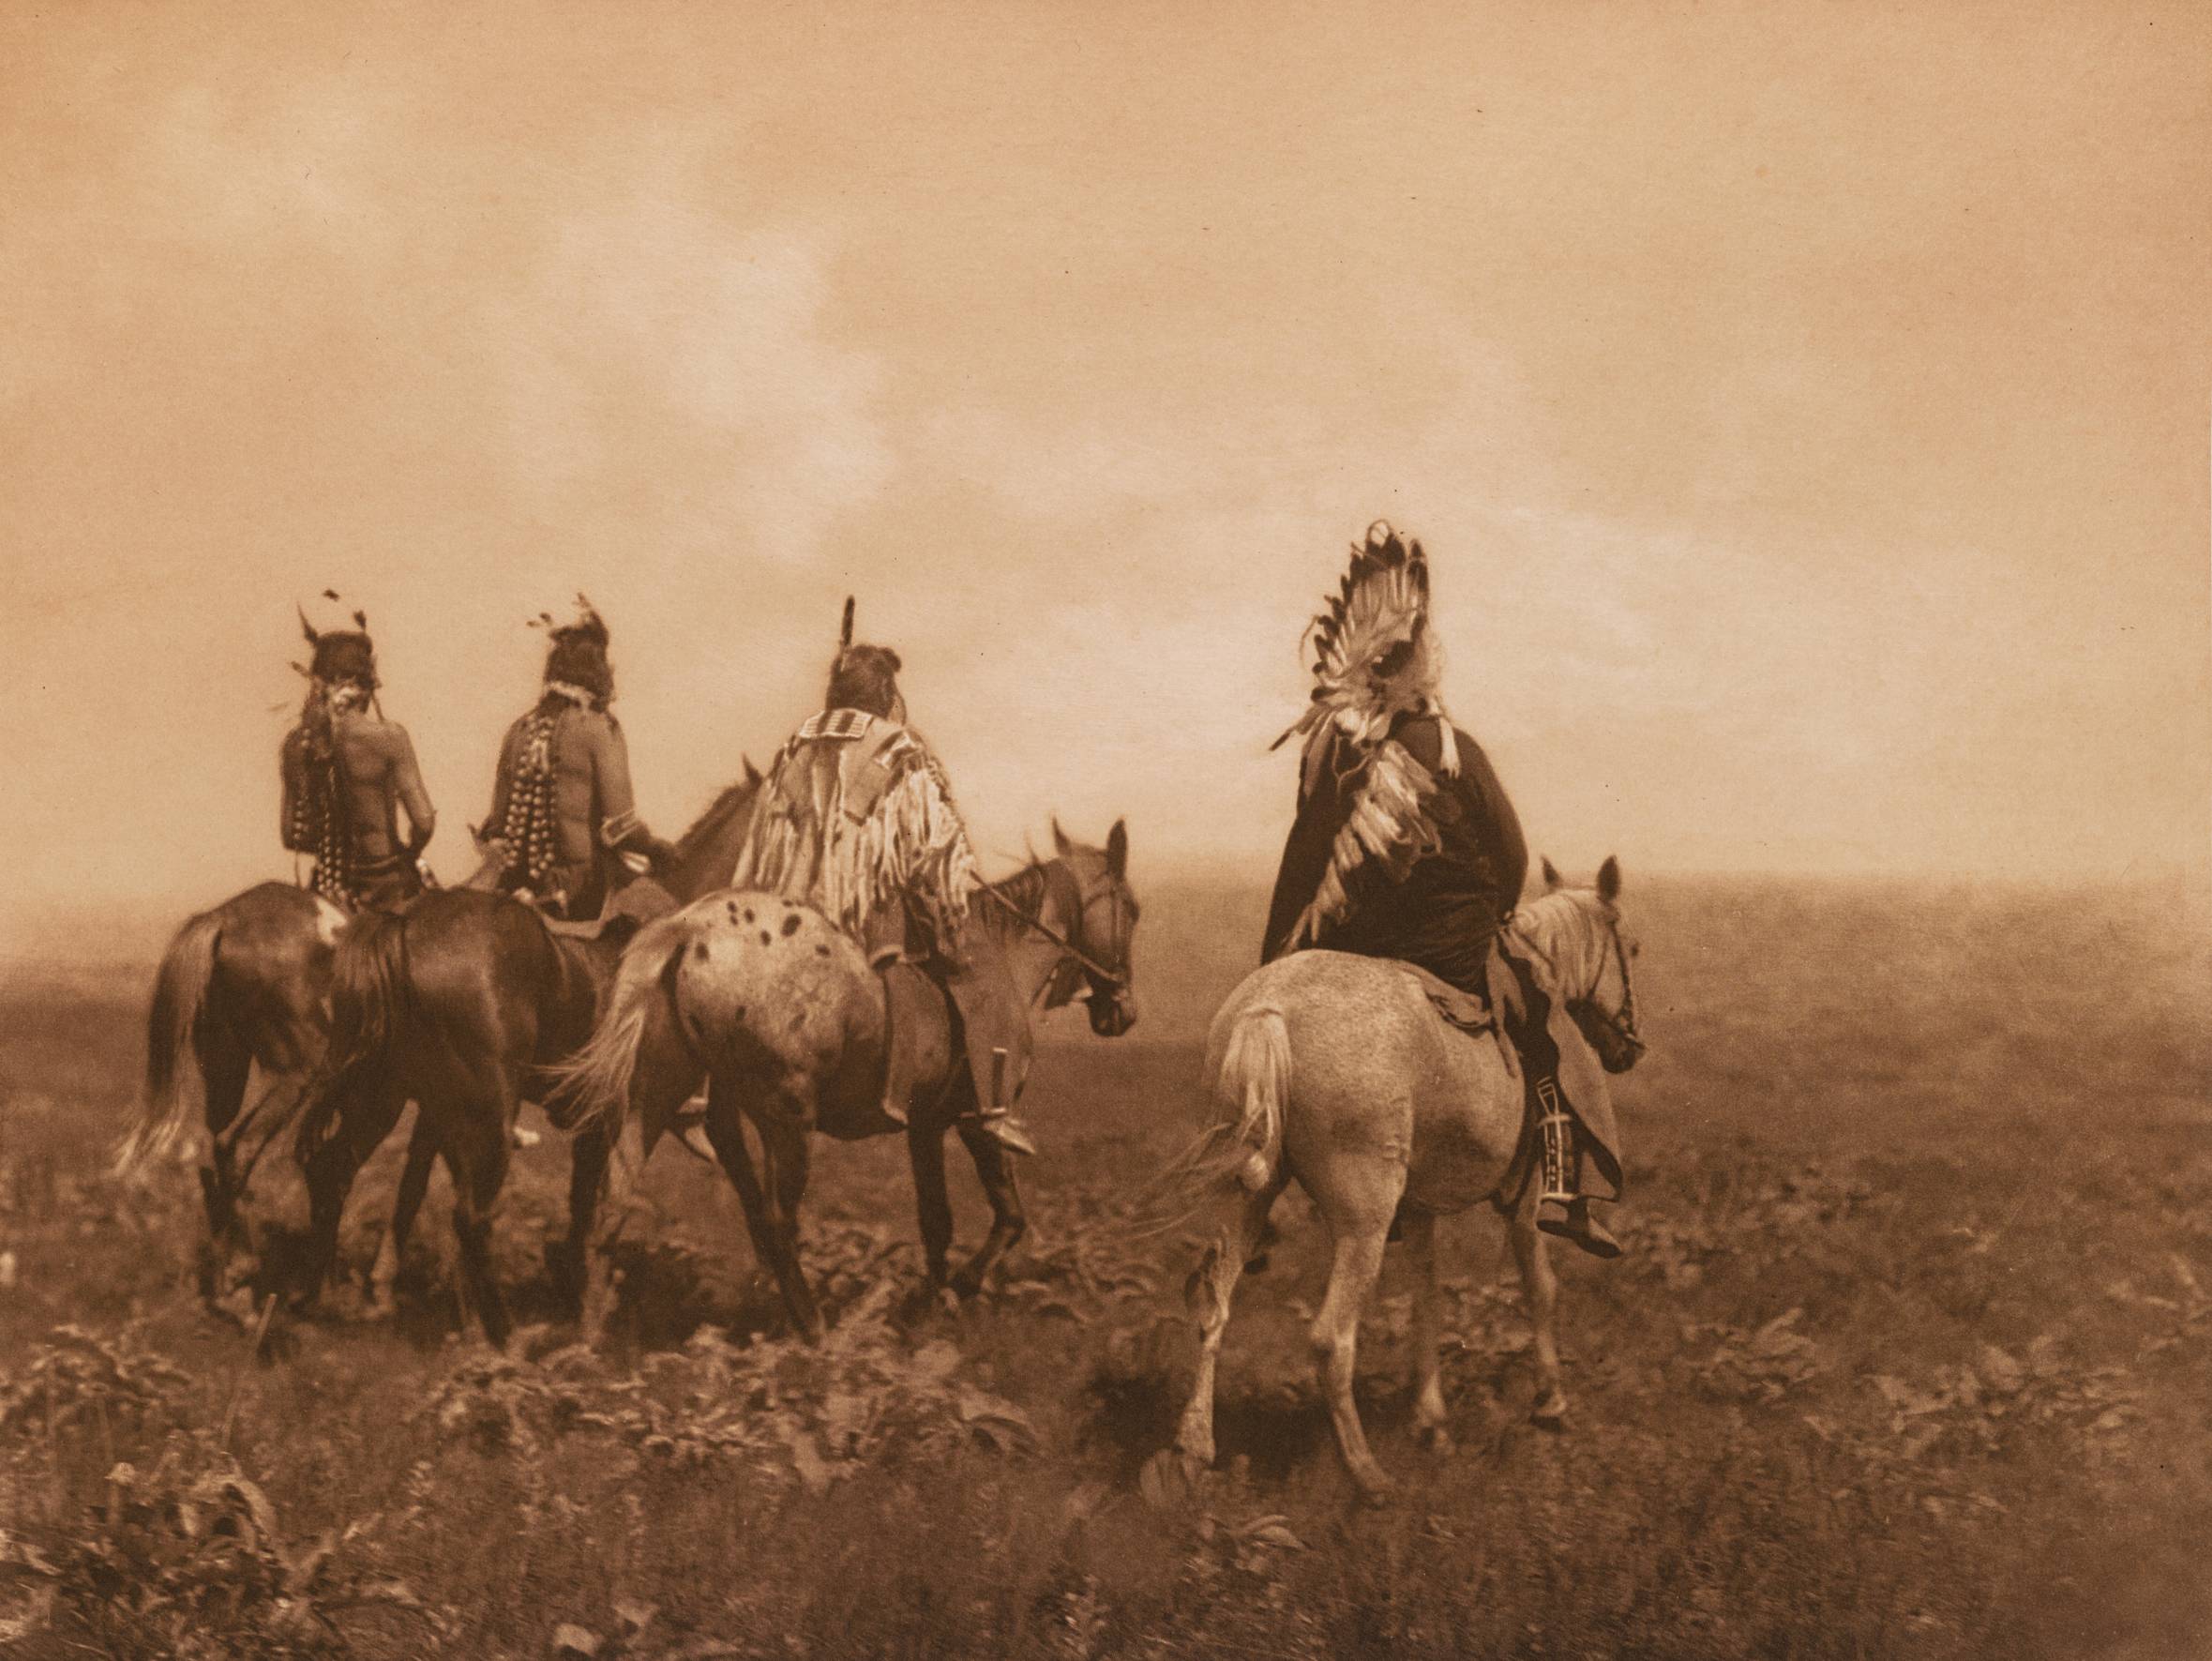 The Chief and His Staff -- Apsaroke by Edward S. Curtis, 1905, published 1909